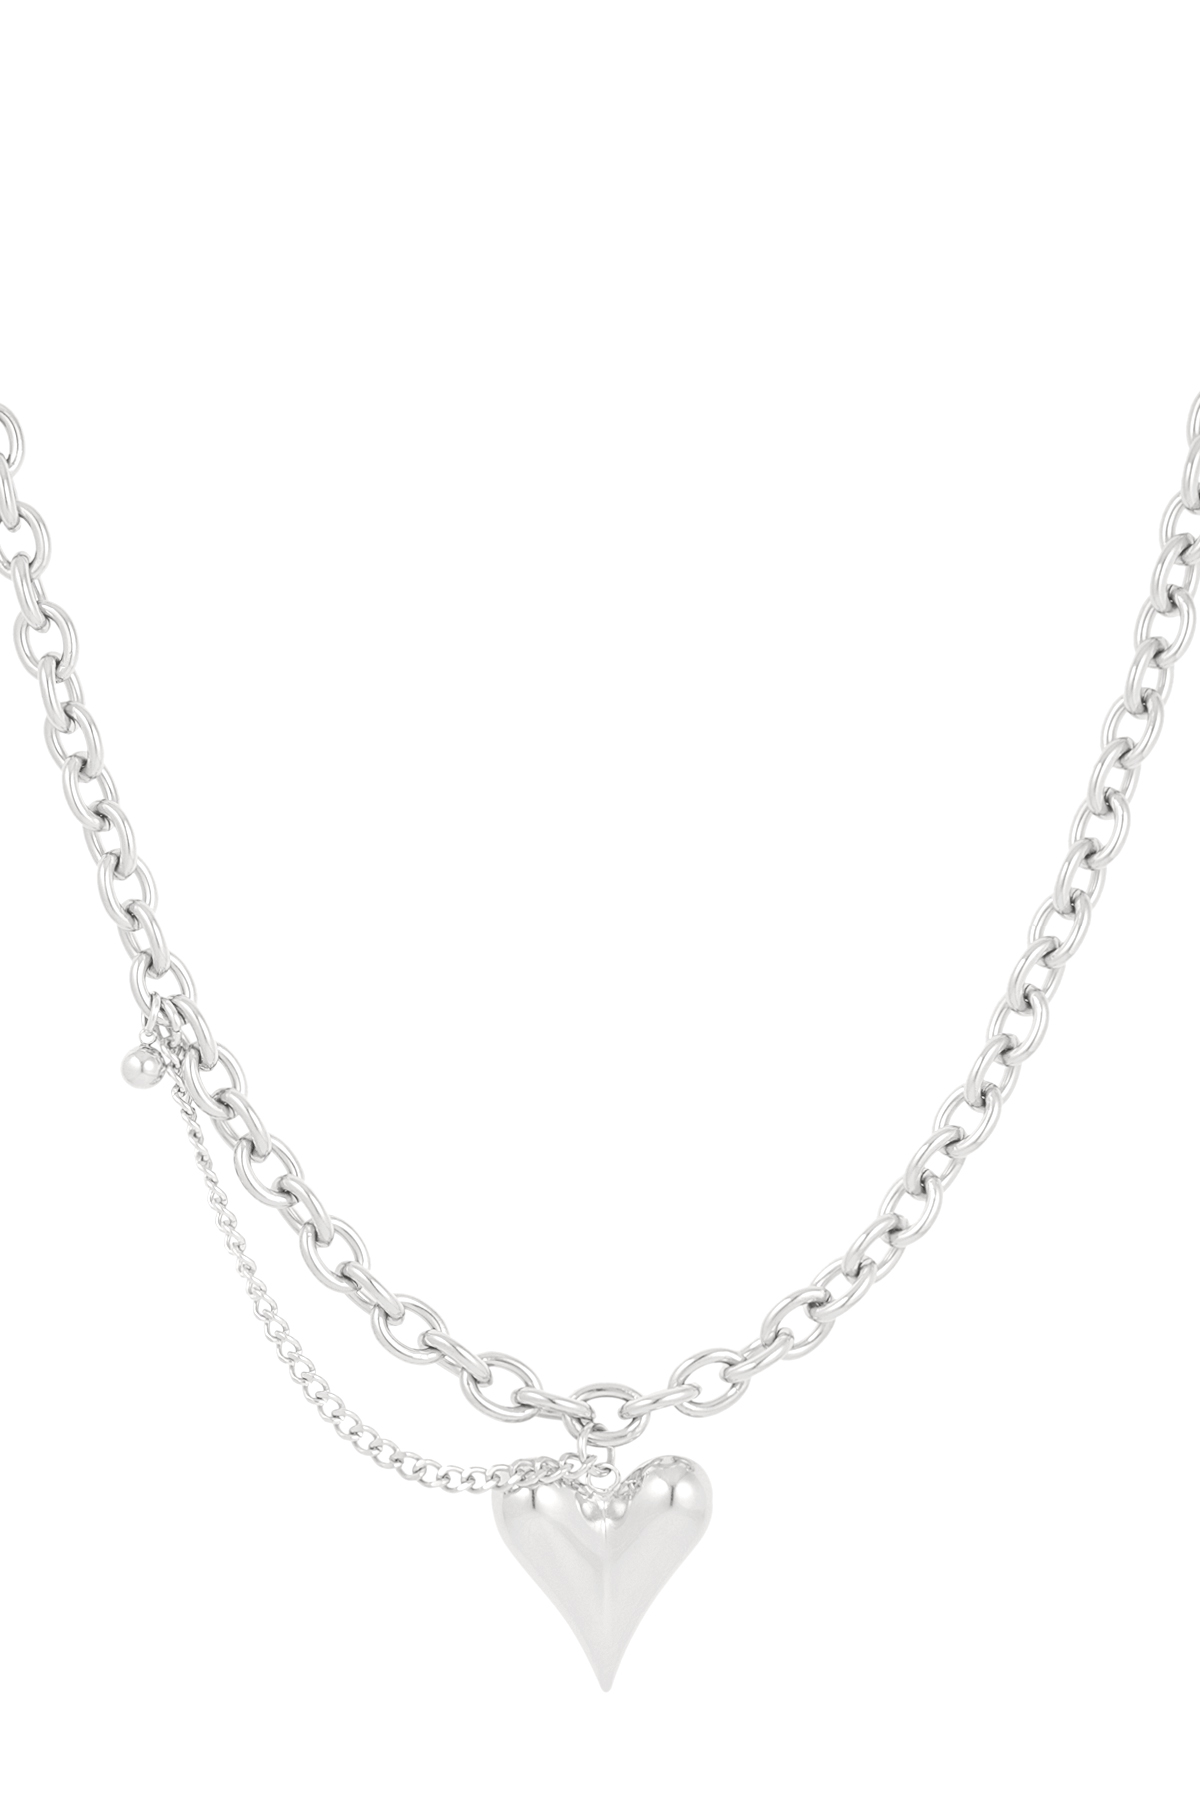 Necklace love life - silver